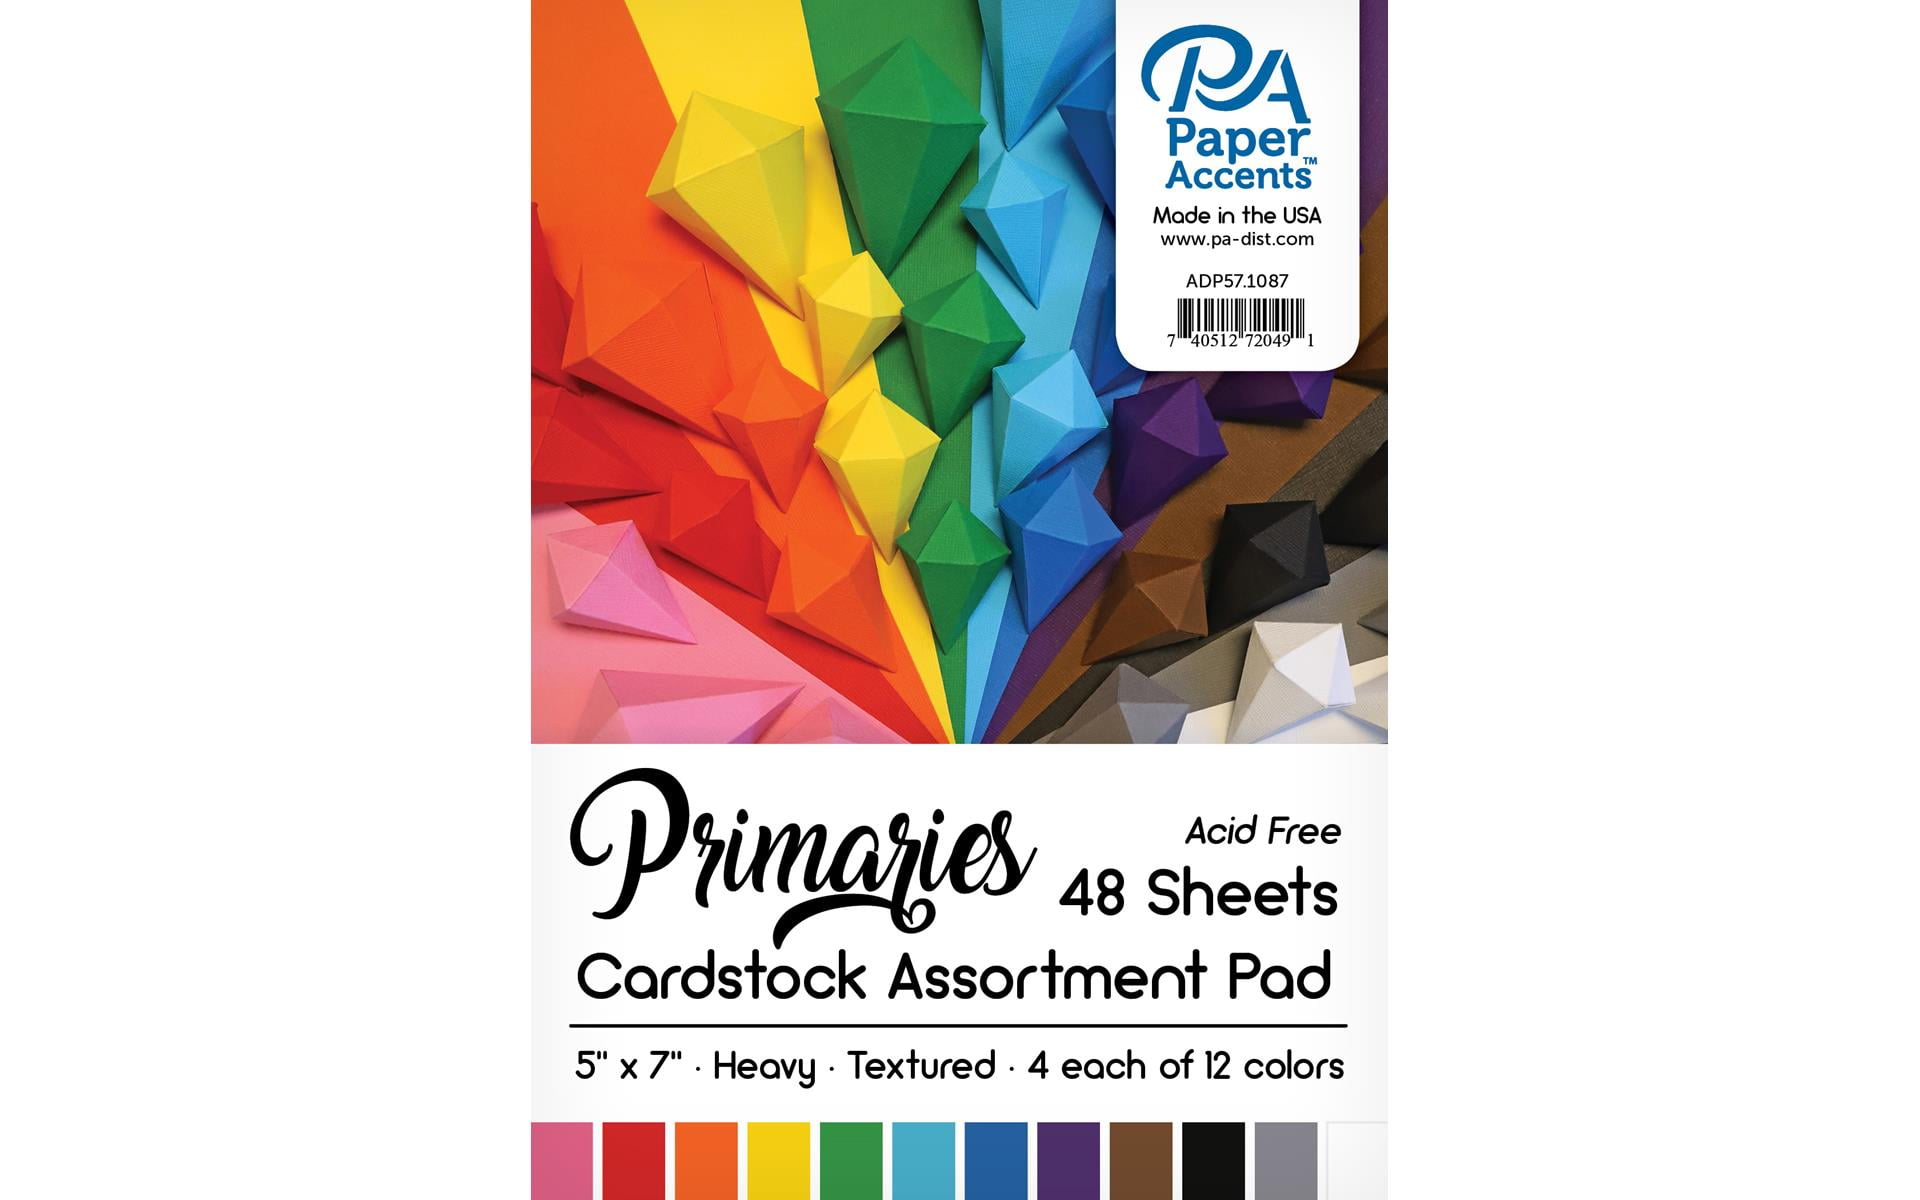 Exact Perforated 8.5 x 11 67 Opaque Colors Cardstock 250 Sheets/Pkg. Orchid, Multipurpose Copy Paper